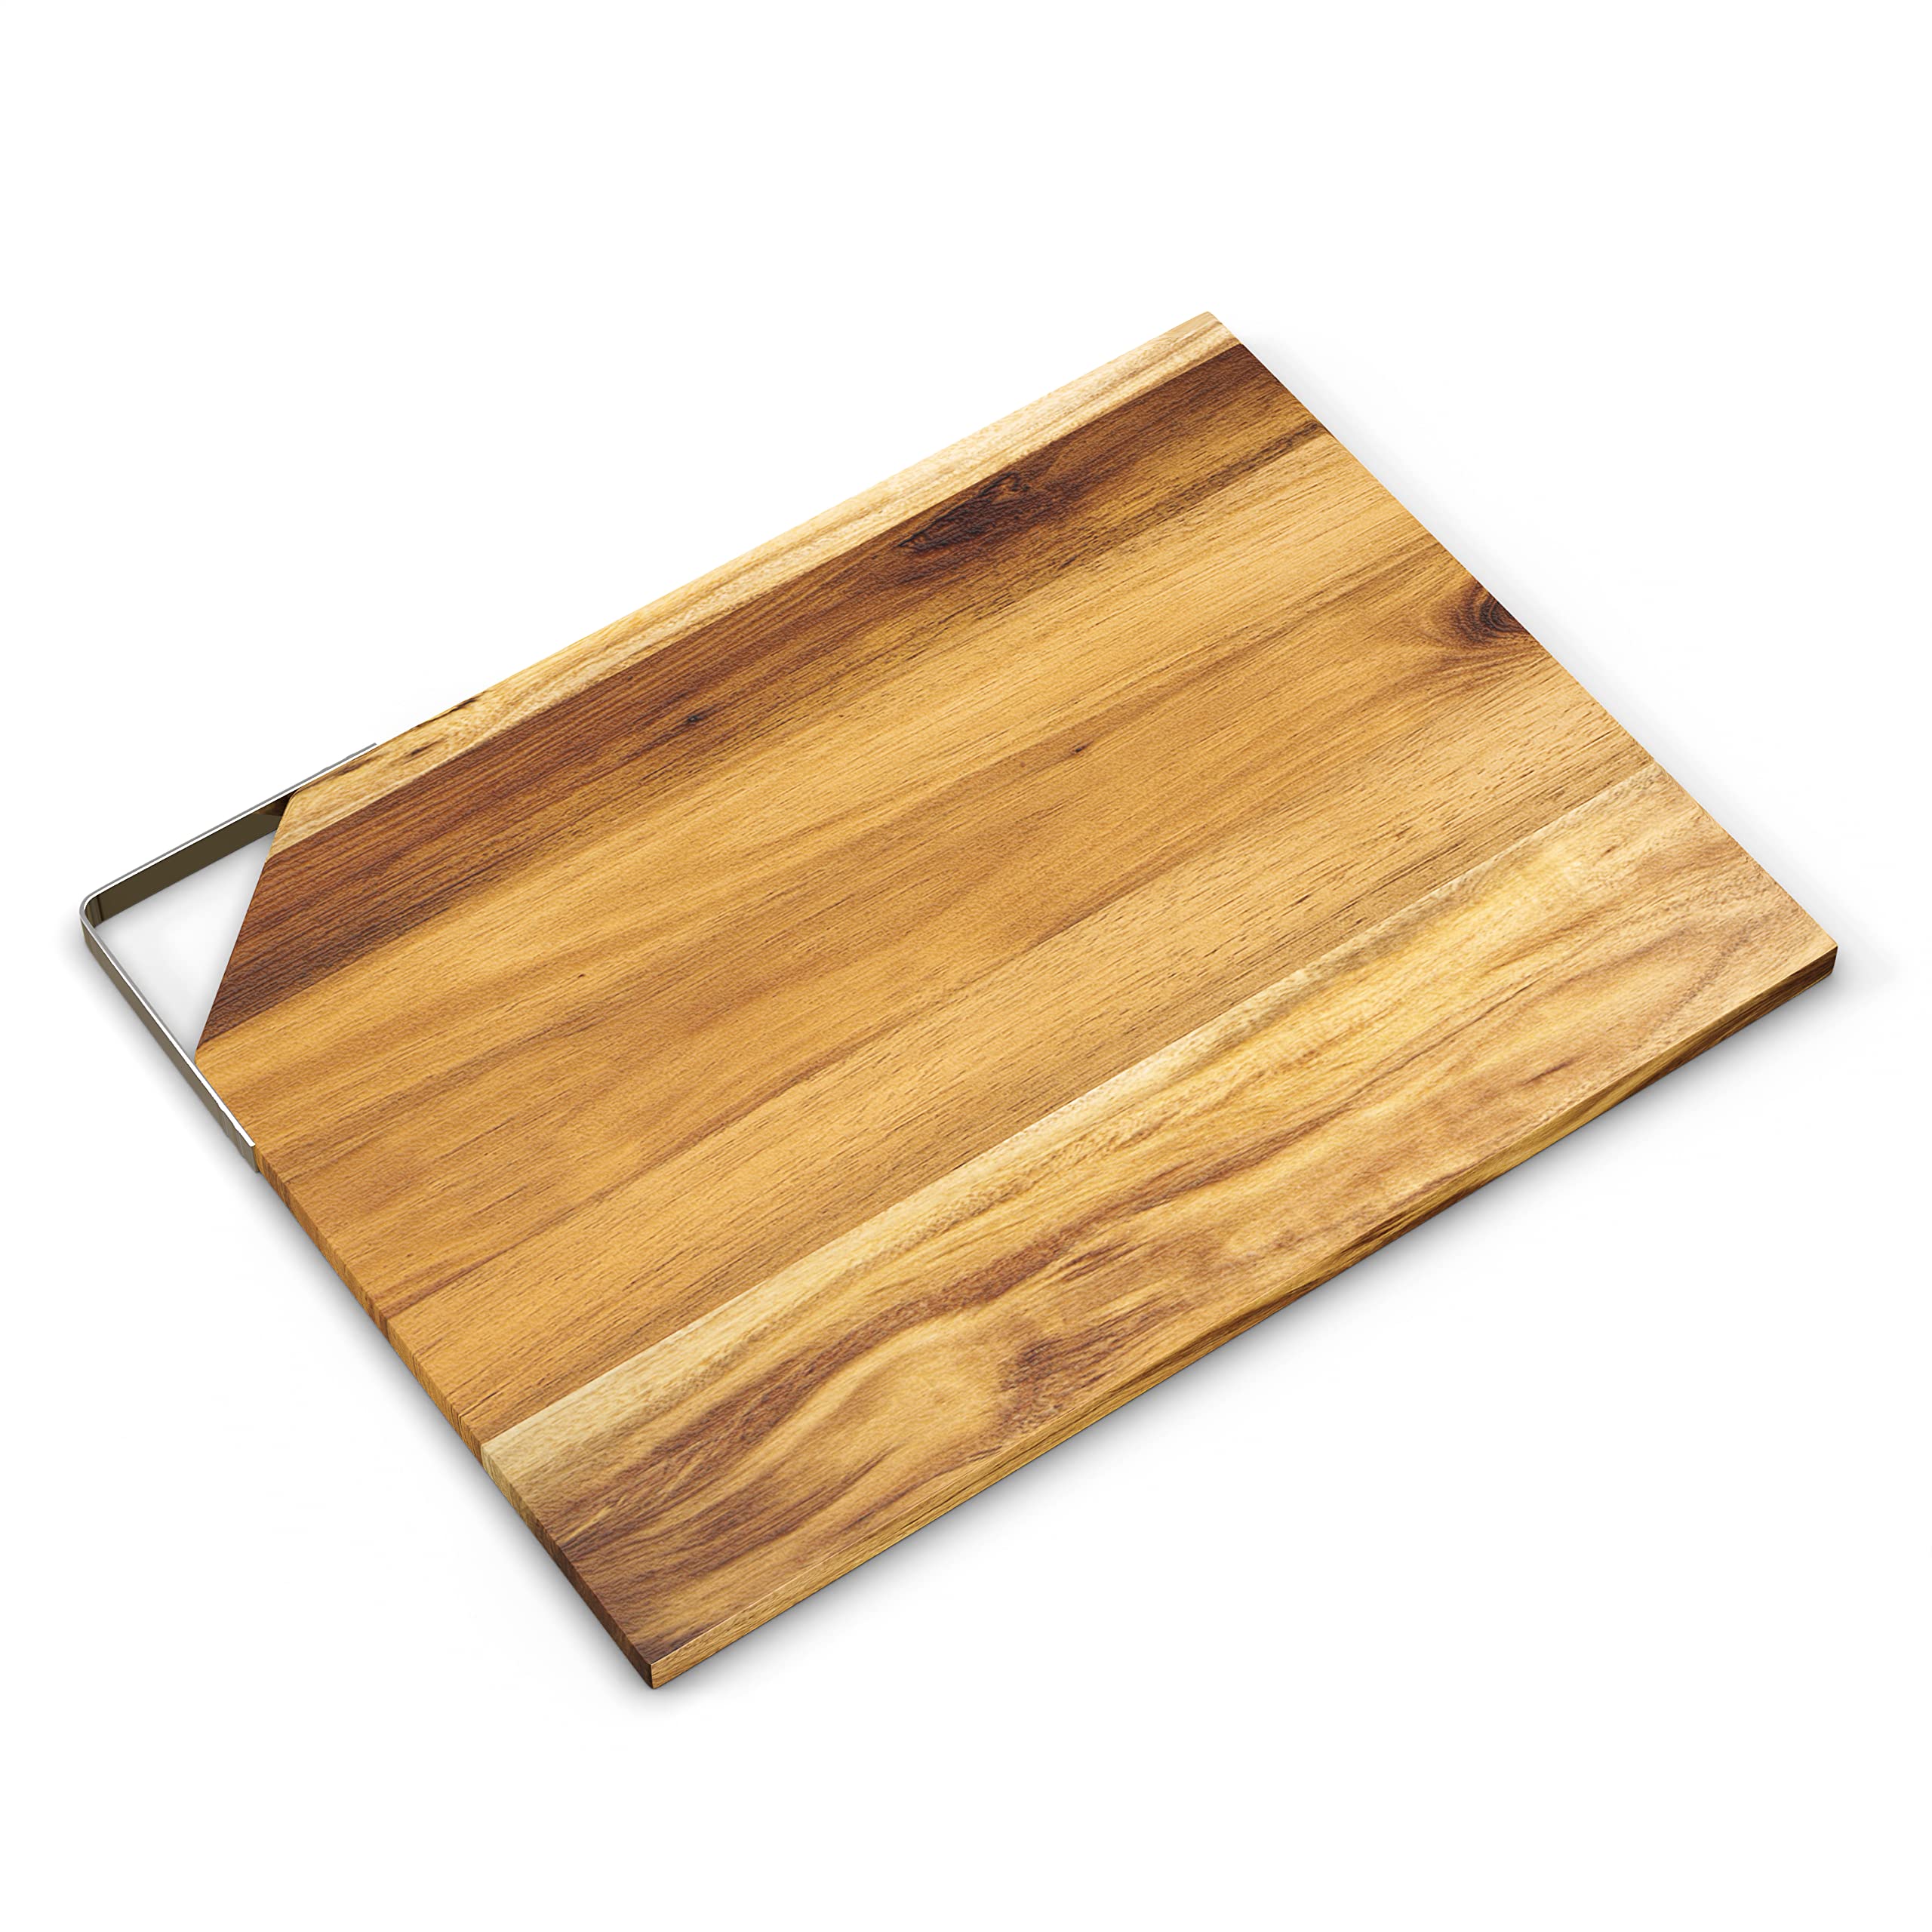 American Atelier’s Acacia Wood Cutting Board with Metal Accent | Large Chopping Board | Serving Tray for Cheese, Meats, Charcuterie Boards | 15.82” x 11.88”